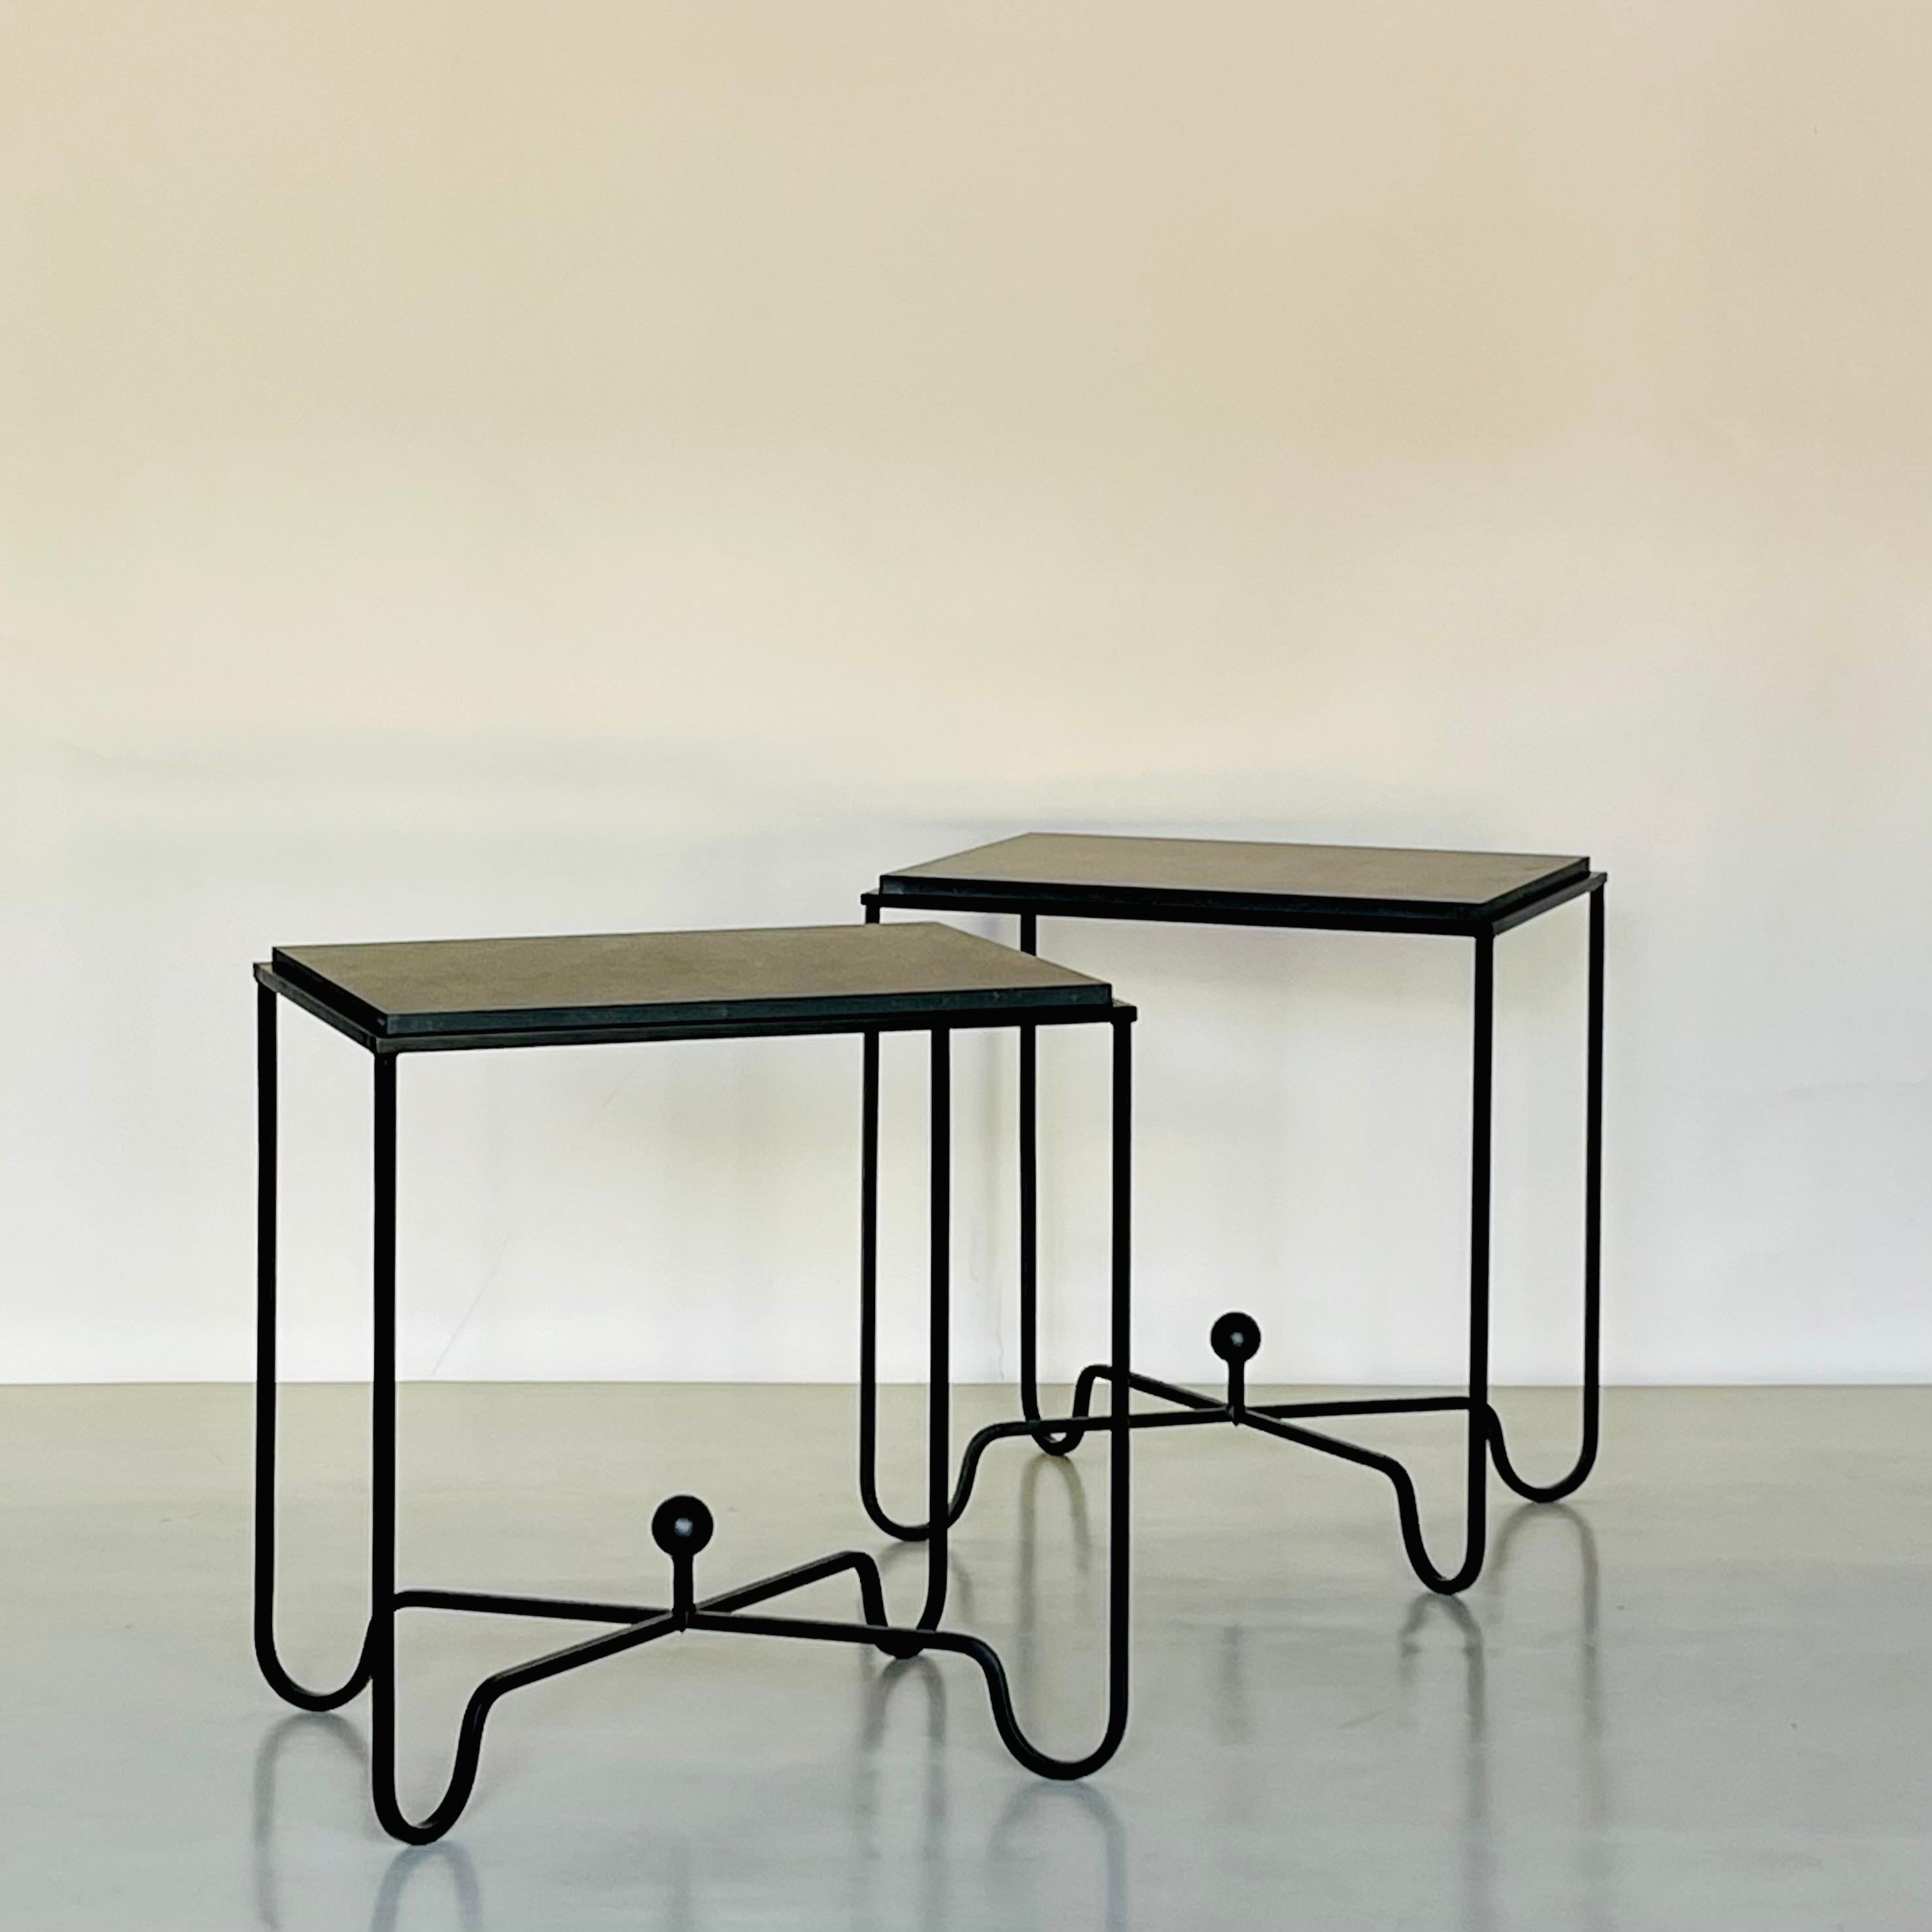 Sculptural blackened steel frames fitted with gorgeous black / anthracite limestone tops. Very durable stone surface.

Inspired by the timeless aesthetic of French modern design, these night stands / side tables / end tables from our exclusive